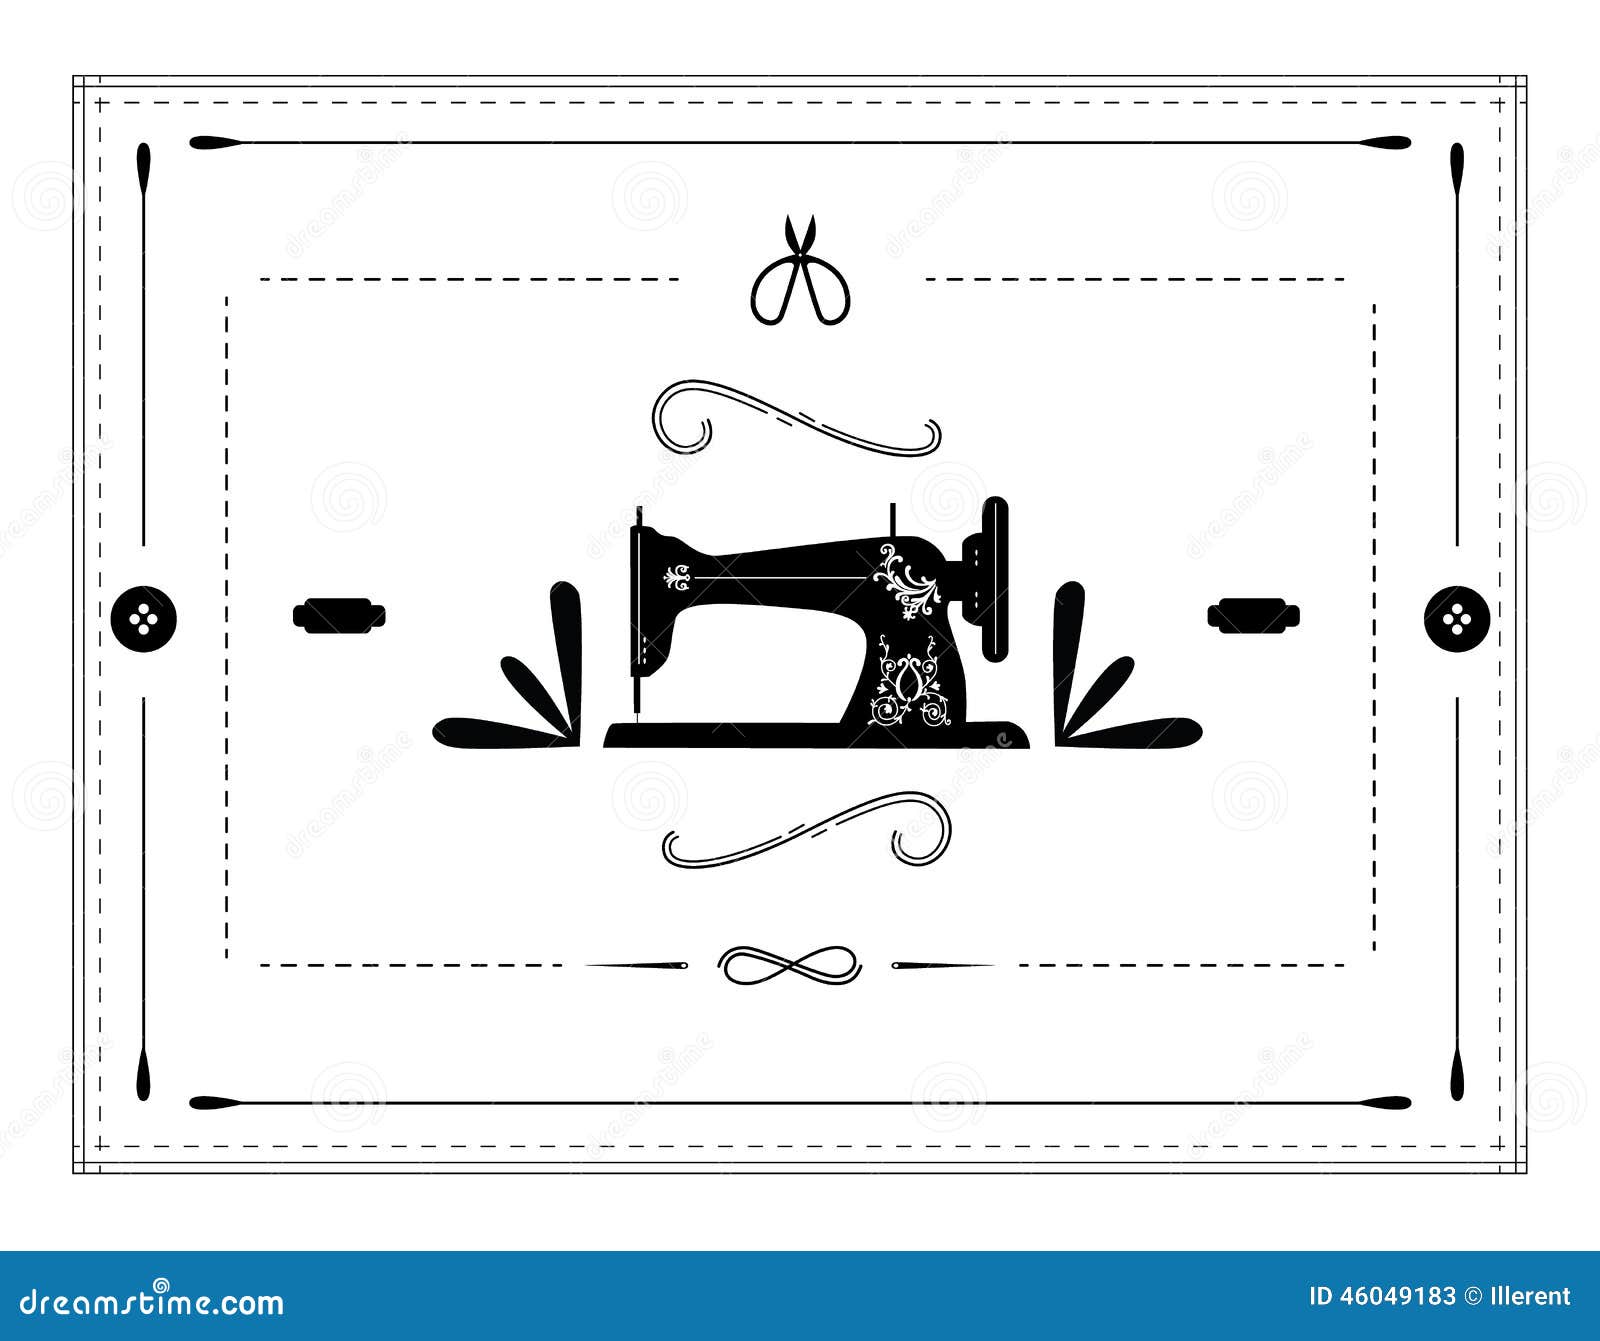 Vintage sewing machine stock vector. Illustration of stitch - 46049183